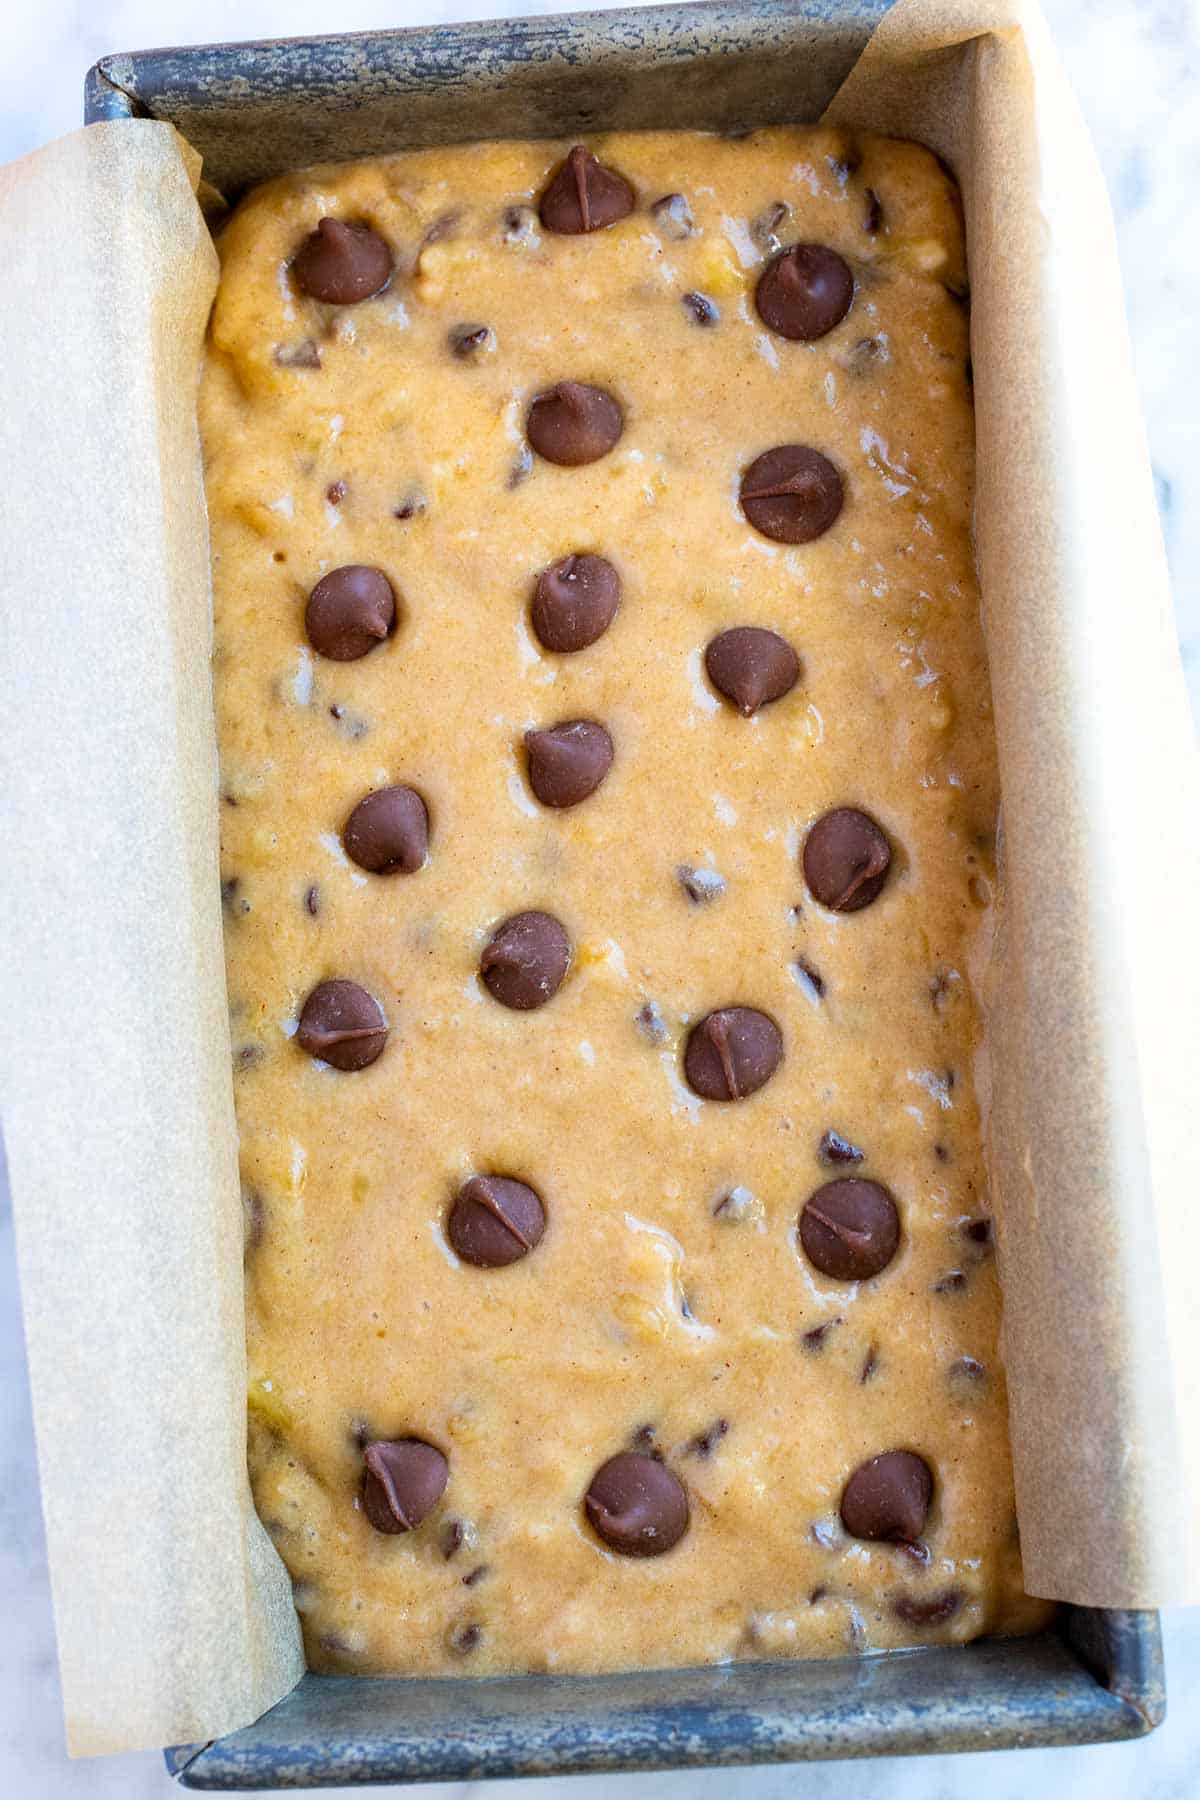 For extra chocolate goodness, add some extra chocolate chips to the top of the batter in the loaf pan.